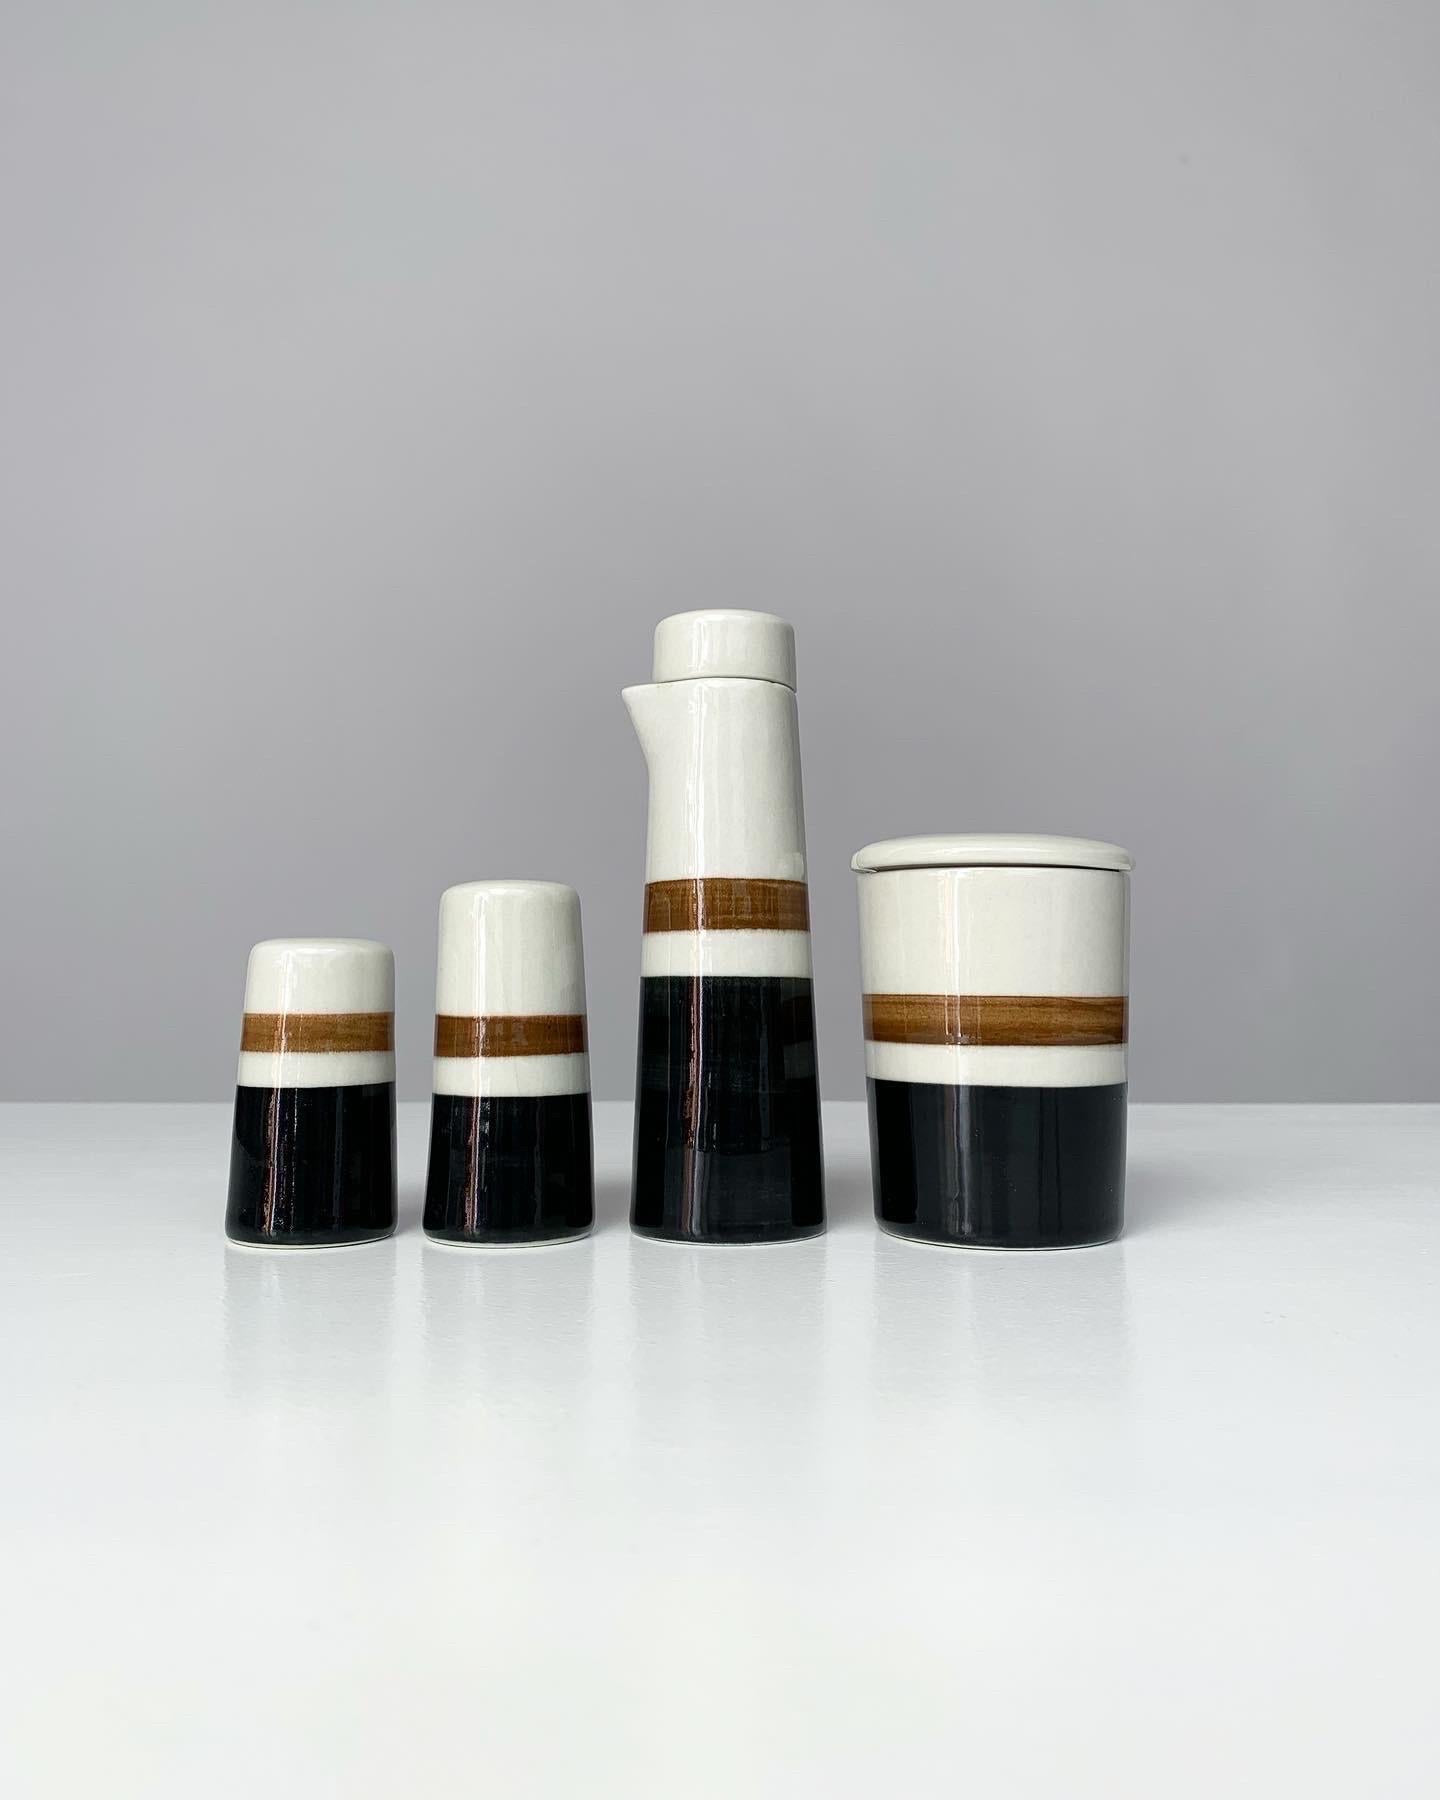 Rare Gunnel Sallmén condiment set for Arabia Finland, designed in 1959 and produced around 1964-1971.

The original purpose was to serve vinegar, mustard, salt and pepper, which are typically used in the finnish kitchen.

The salt shaker has an